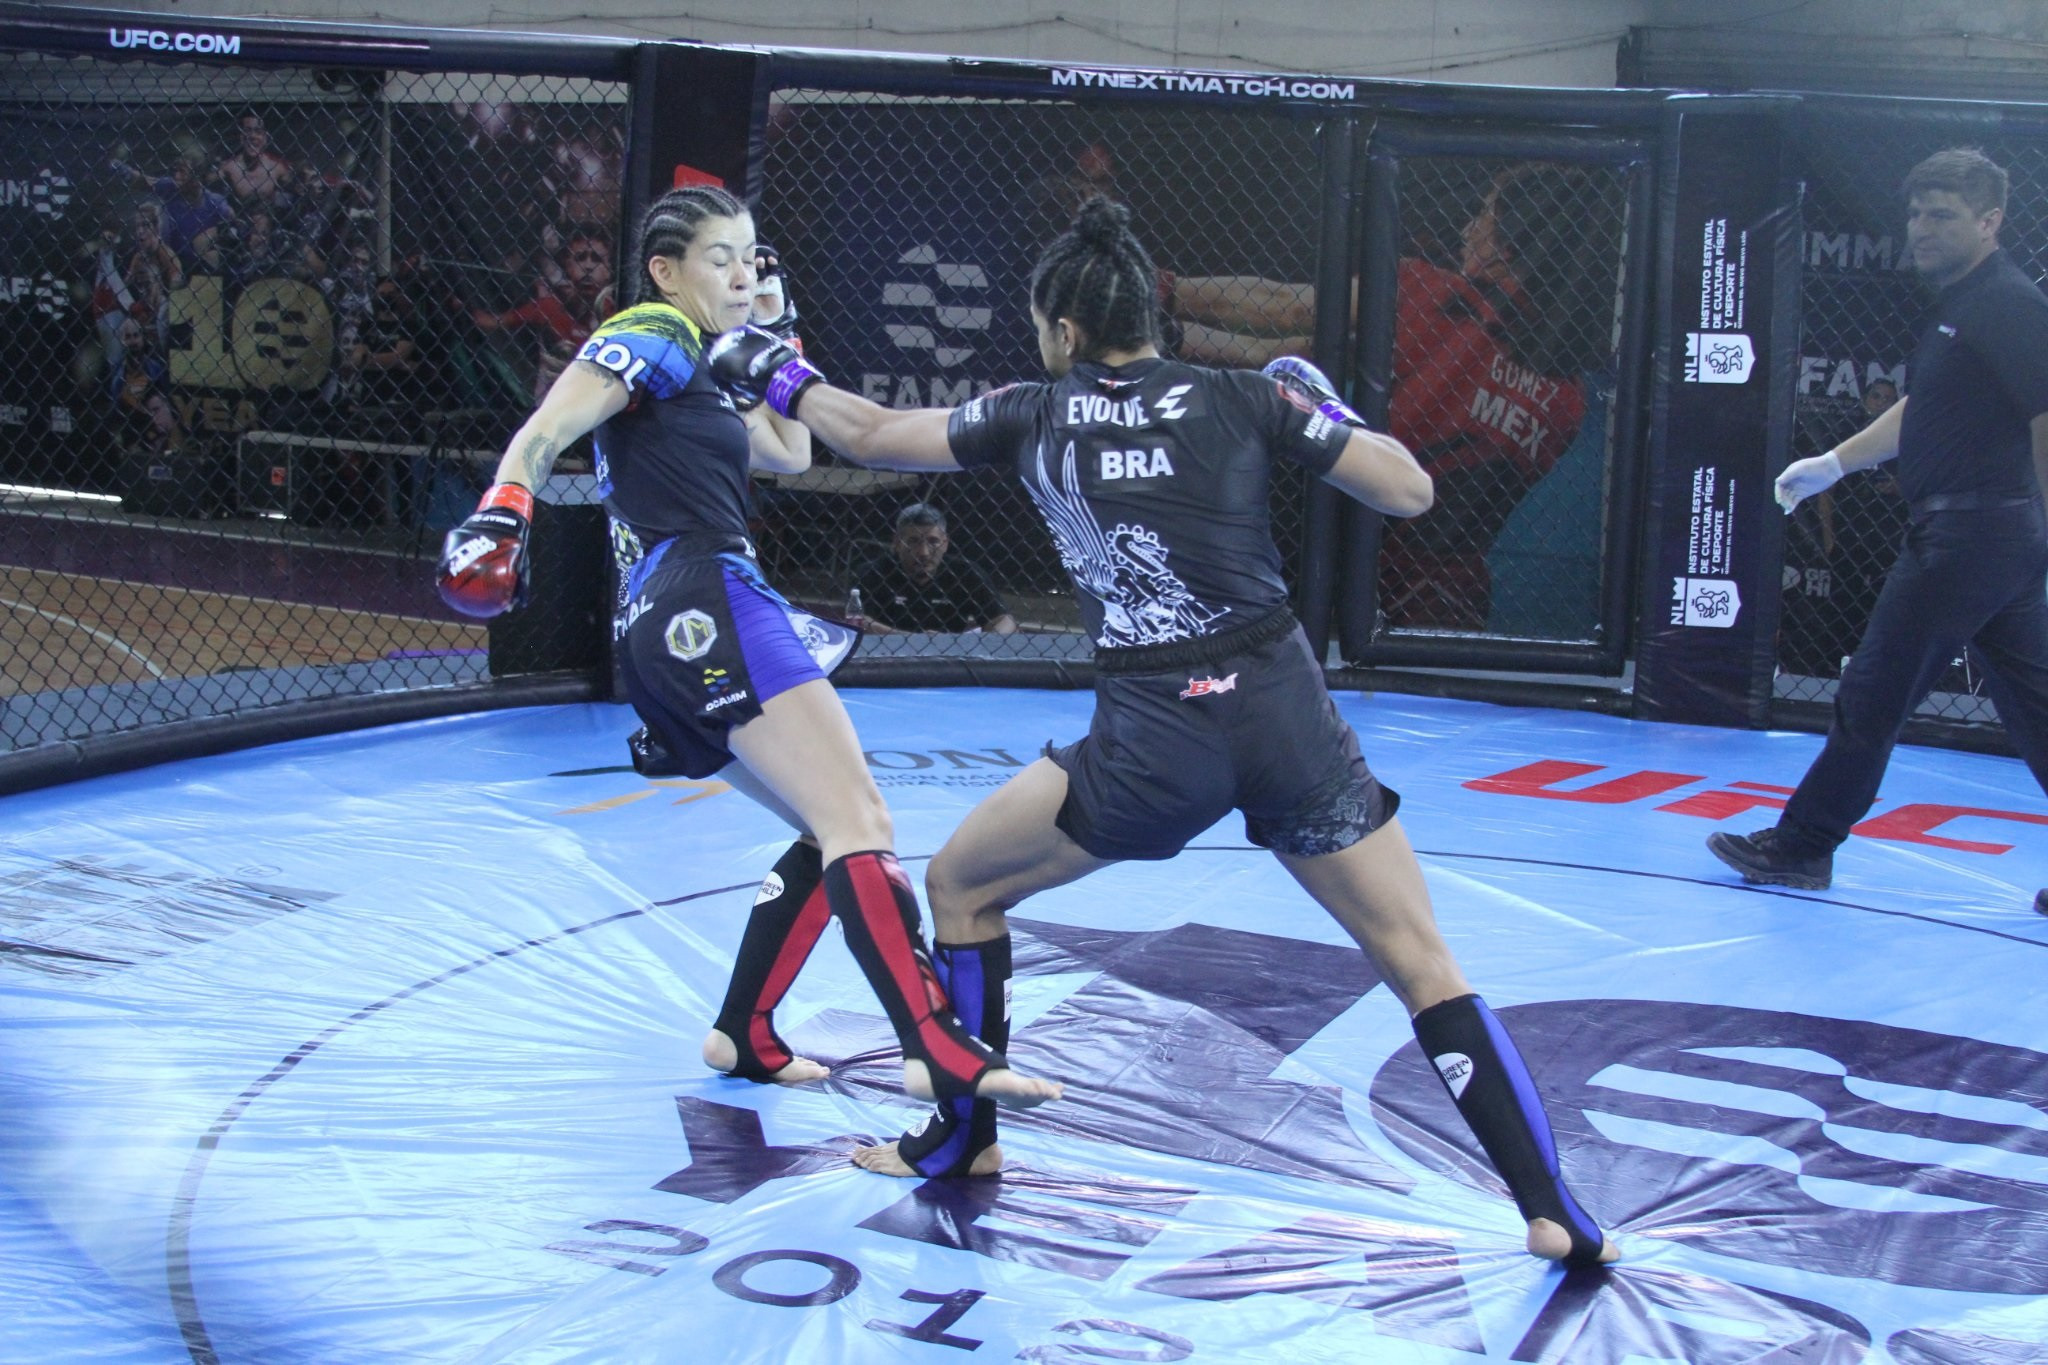 Brazil enjoyed three wins on the second day of the IMMAF Pan American Championships in Monterrey ©IMMAF